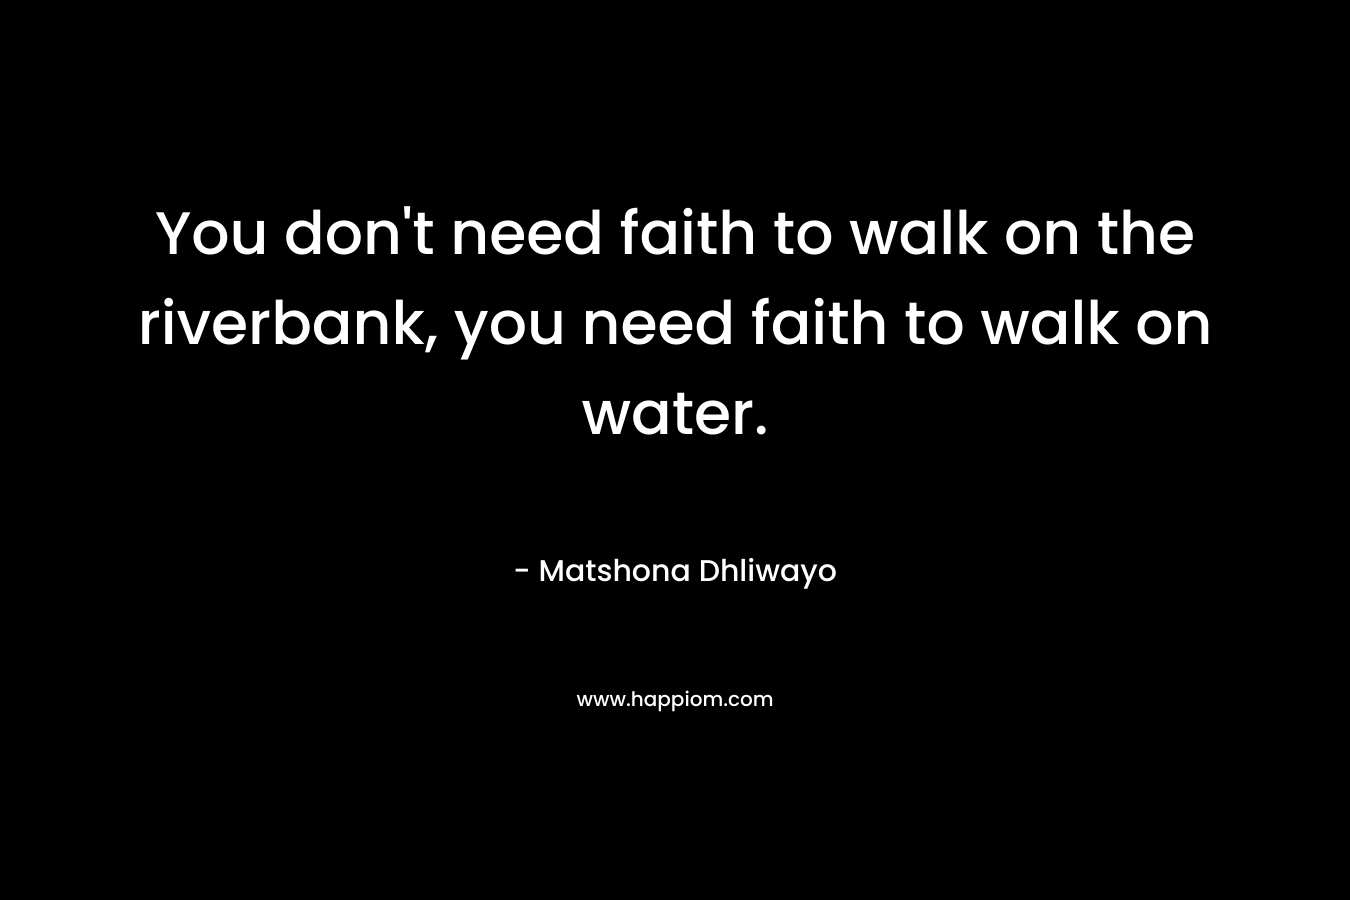 You don't need faith to walk on the riverbank, you need faith to walk on water.